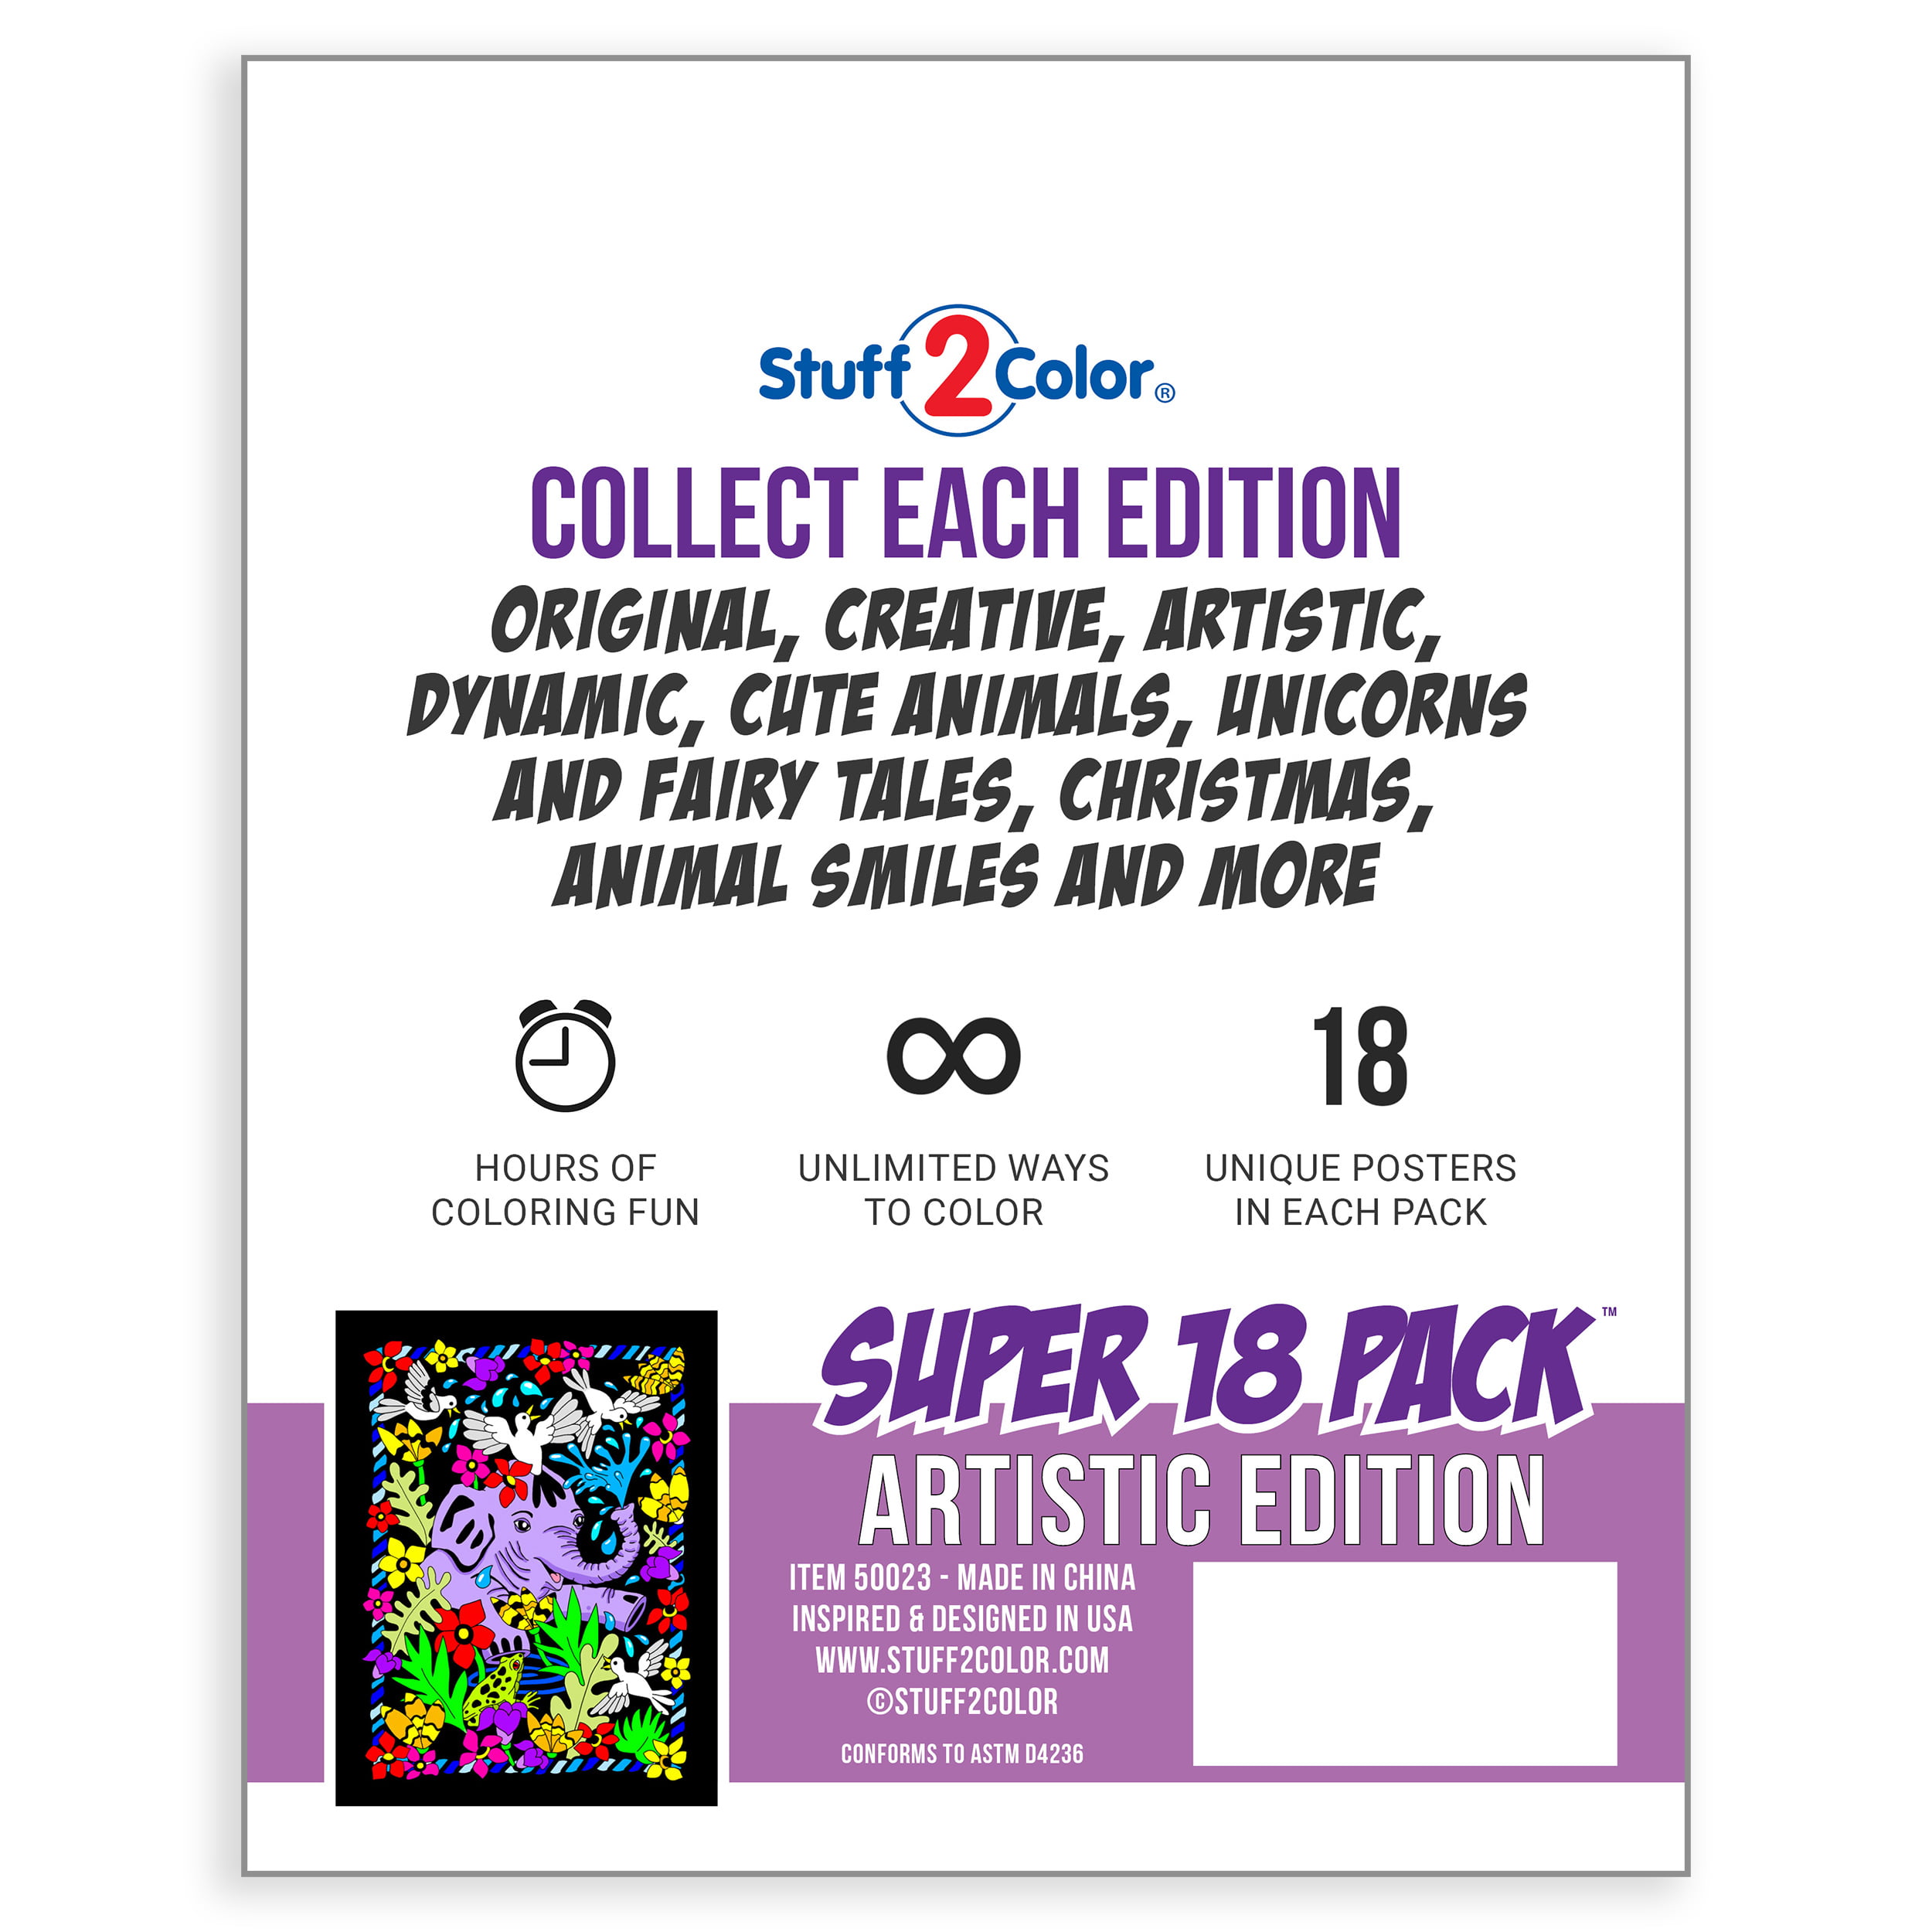 Super Pack of 18 Fuzzy Velvet Coloring Posters (Artistic Edition) -  Stuff2Color 